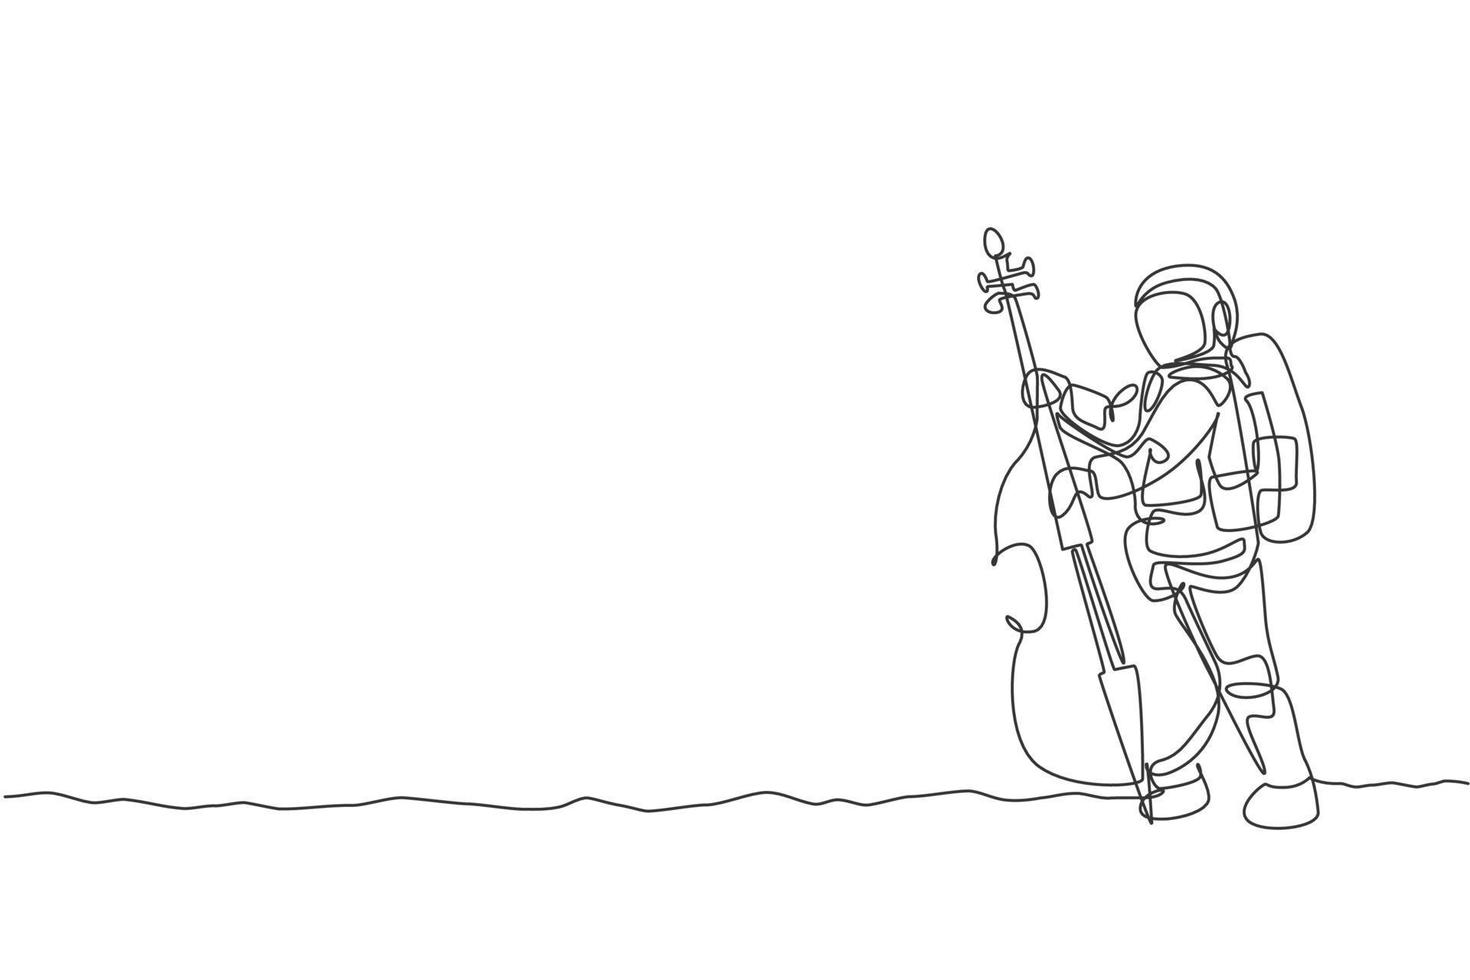 One single line drawing of spaceman cellist playing cello musical instrument on moon surface vector illustration. Music concert poster with space astronaut concept. Modern continuous line draw design